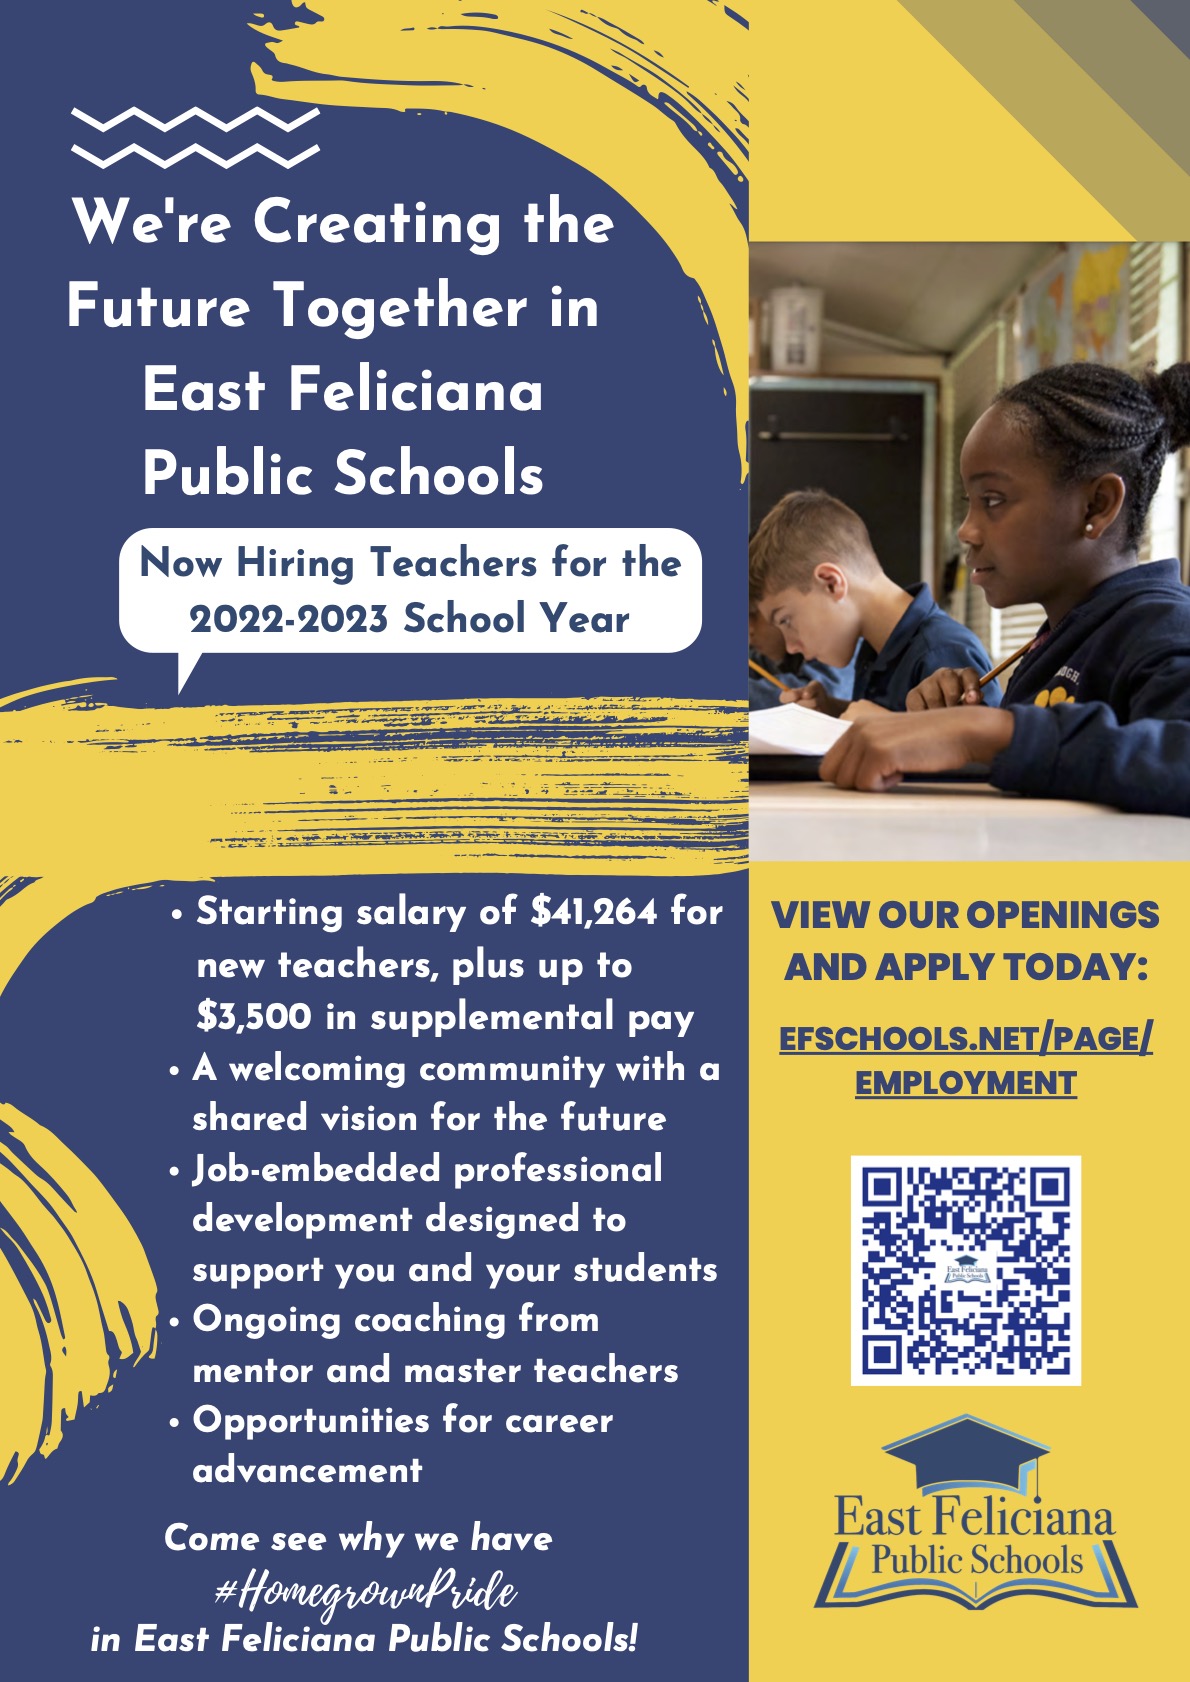  We're Creating the Future Together in East Feliciana Public Schools Now Hiring Teachers for the 2022-2023 School Year Starting salary of $41,264 for new teachers, plus up to $3,500 in supplemental pay A welcoming community with a shared vision for the future Job-embedded professional development designed to support you and your students Ongoing coaching from mentor and master teachers Opportunities for career advancement Come see why we have #HomegrownPride in East Feliciana Public Schools!